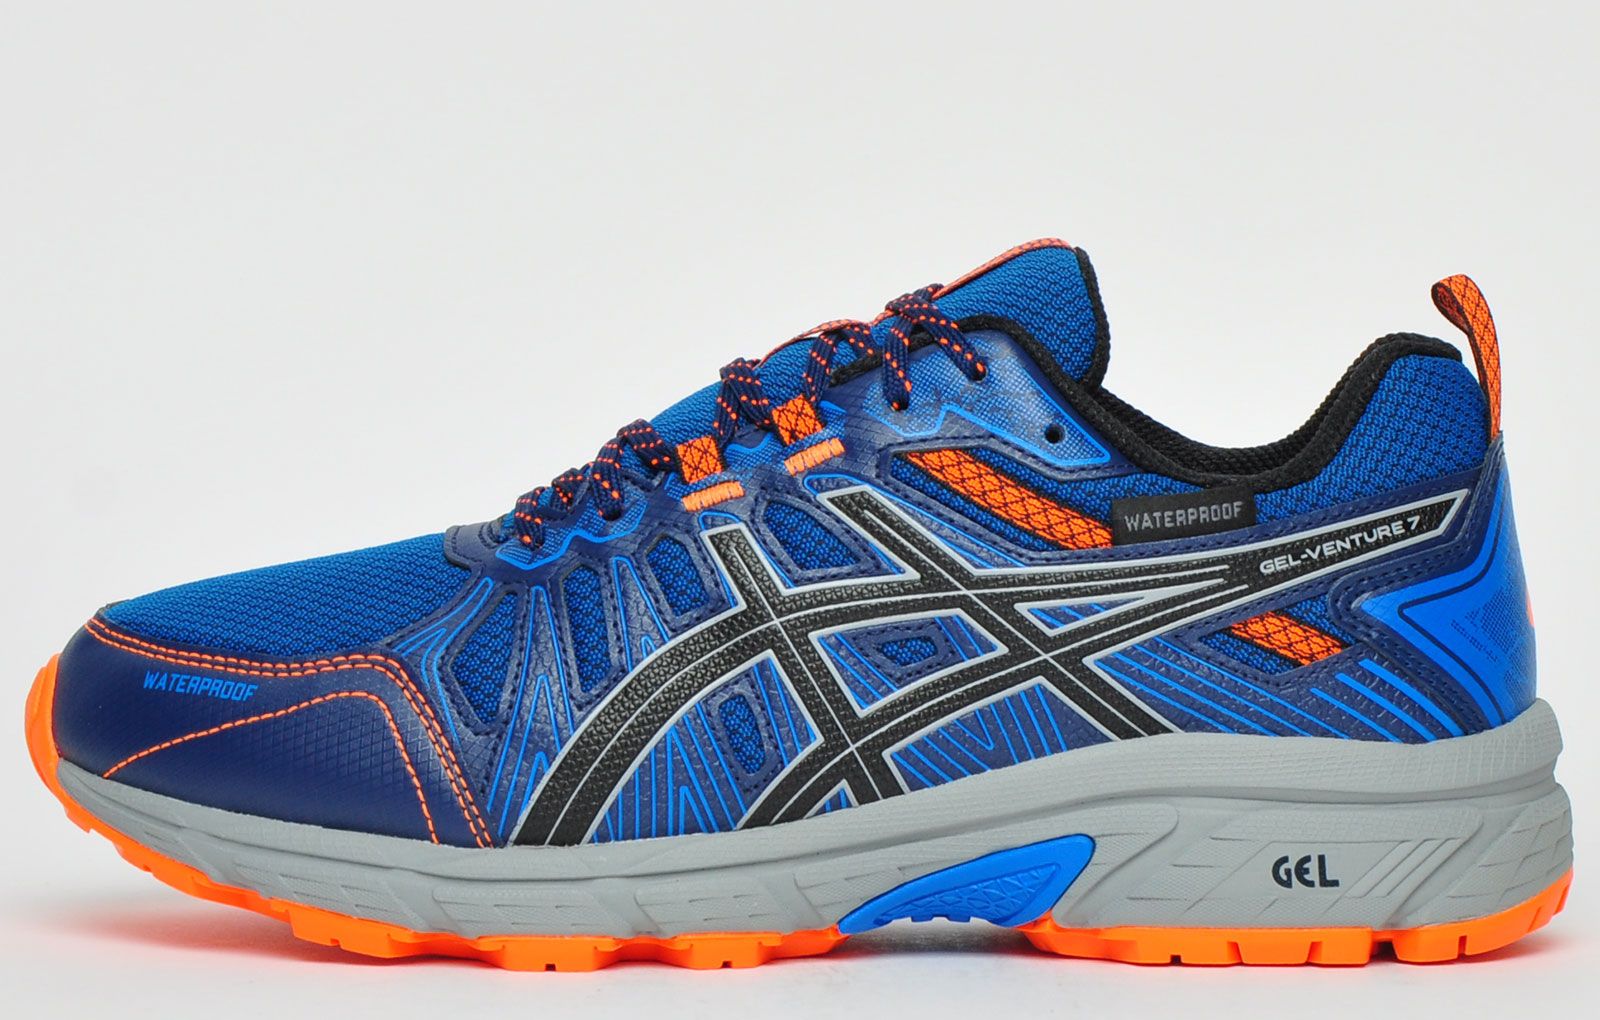 <p>These Asics Gel Venture 7 men’s all-terrain waterproof running shoes will provide excellent support and traction no matter what comes your way. Featuring a practical lugged outsole that offers grip on uphill and downhill conditions. <br></p><p>Whether you’re a beginner or professional, these all terrain running shoes are perfect for you! Engineered from a fusion of textile mesh and synthetic materials, these Asics Gel Venture 7 men’s all-terrain running shoes feature a practical lightweight design with maximum performance capabilities, the Asics Venture 7 is a must have on and off-road shoe that will keep your feet dry and deliver a supportive comfortable ride wherever you go</p><p><br></p> <p> - Textile mesh upper construction enhances breathability </p> <p>- Supportive synthetic overlays deliver the perfect fit</p> <p> - Stitched Toe Bumper delivers extra protection against trail hazards</p> <p> - Padded inner delivers super comfy wear</p> <p> - Waterproof construction </p> <p>- Reaarfoot Gel cushioning system delivers shock resistance</p> <p> - Trustic system reduces weight whilst upkeeping the support </p> <p>- Asics Branding throughout</p>